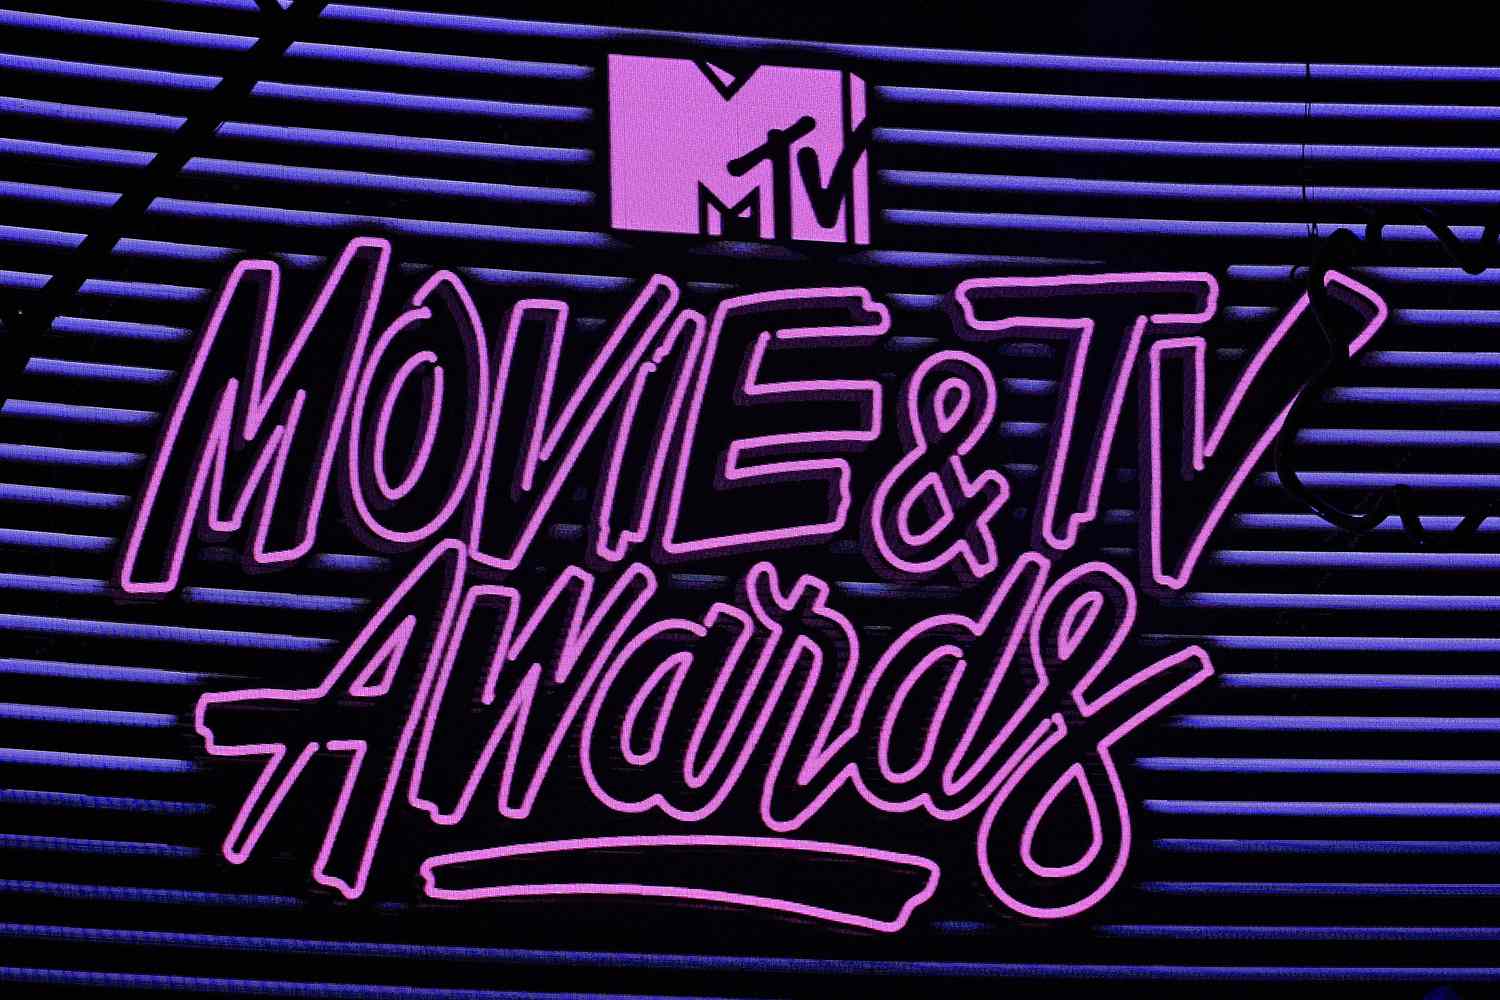 LOS ANGELES, CA - MAY 07: A view of the MTV Awards signage onstage during the 2017 MTV Movie And TV Awards at The Shrine Auditorium on May 7, 2017 in Los Angeles, California. (Photo by Kevork Djansezian/Getty Images)